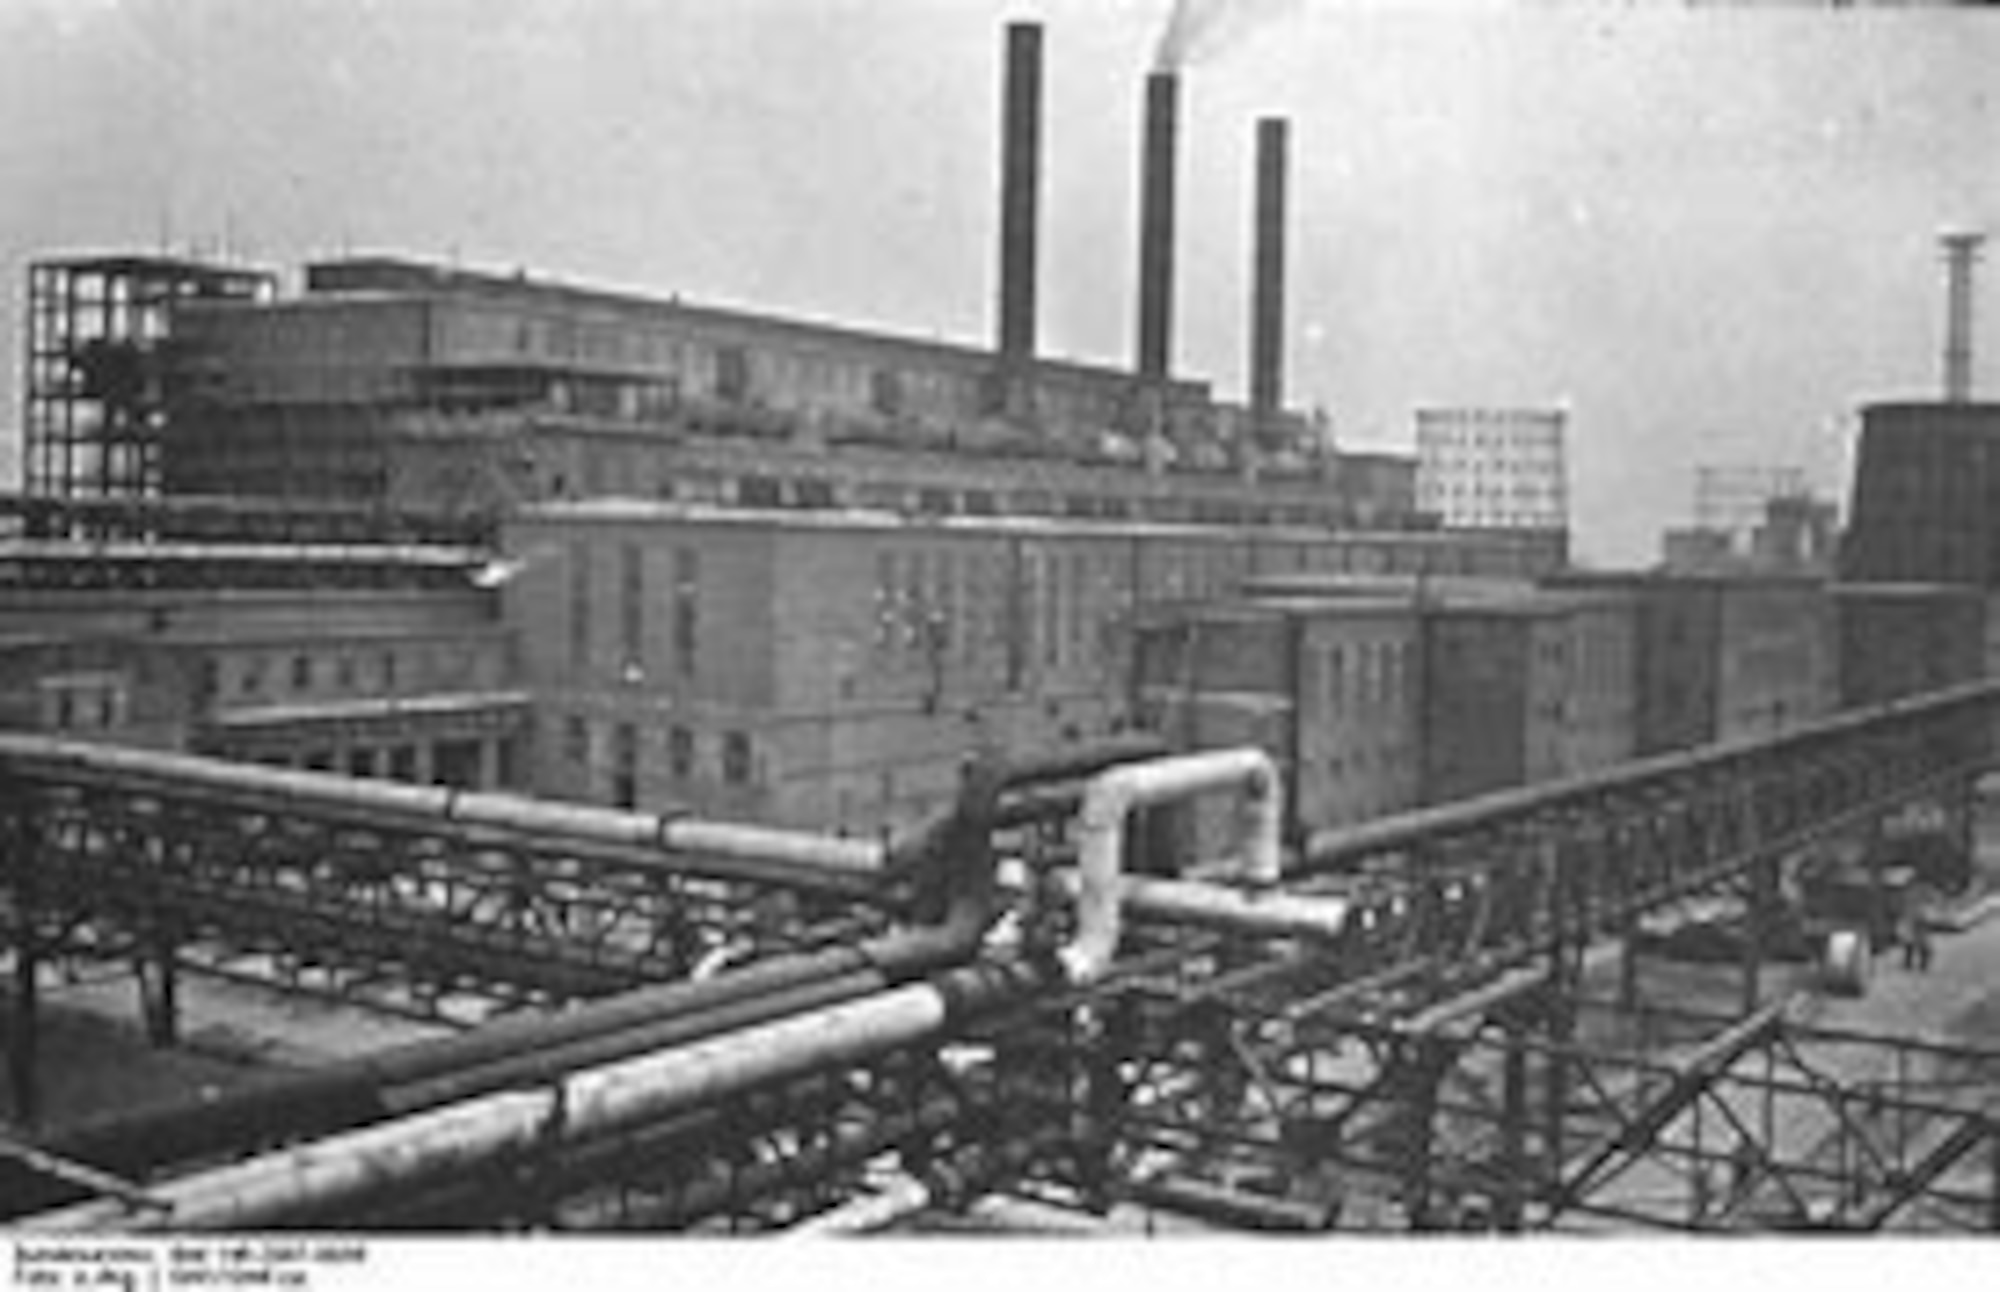 The synthetic rubber and oil plant at Monowitz-Buna, a part of the Auschwitz concentration camp system, used slave laborers. From August to December 1944, 15th Air Force B-24 Liberators bombed the complex four times.